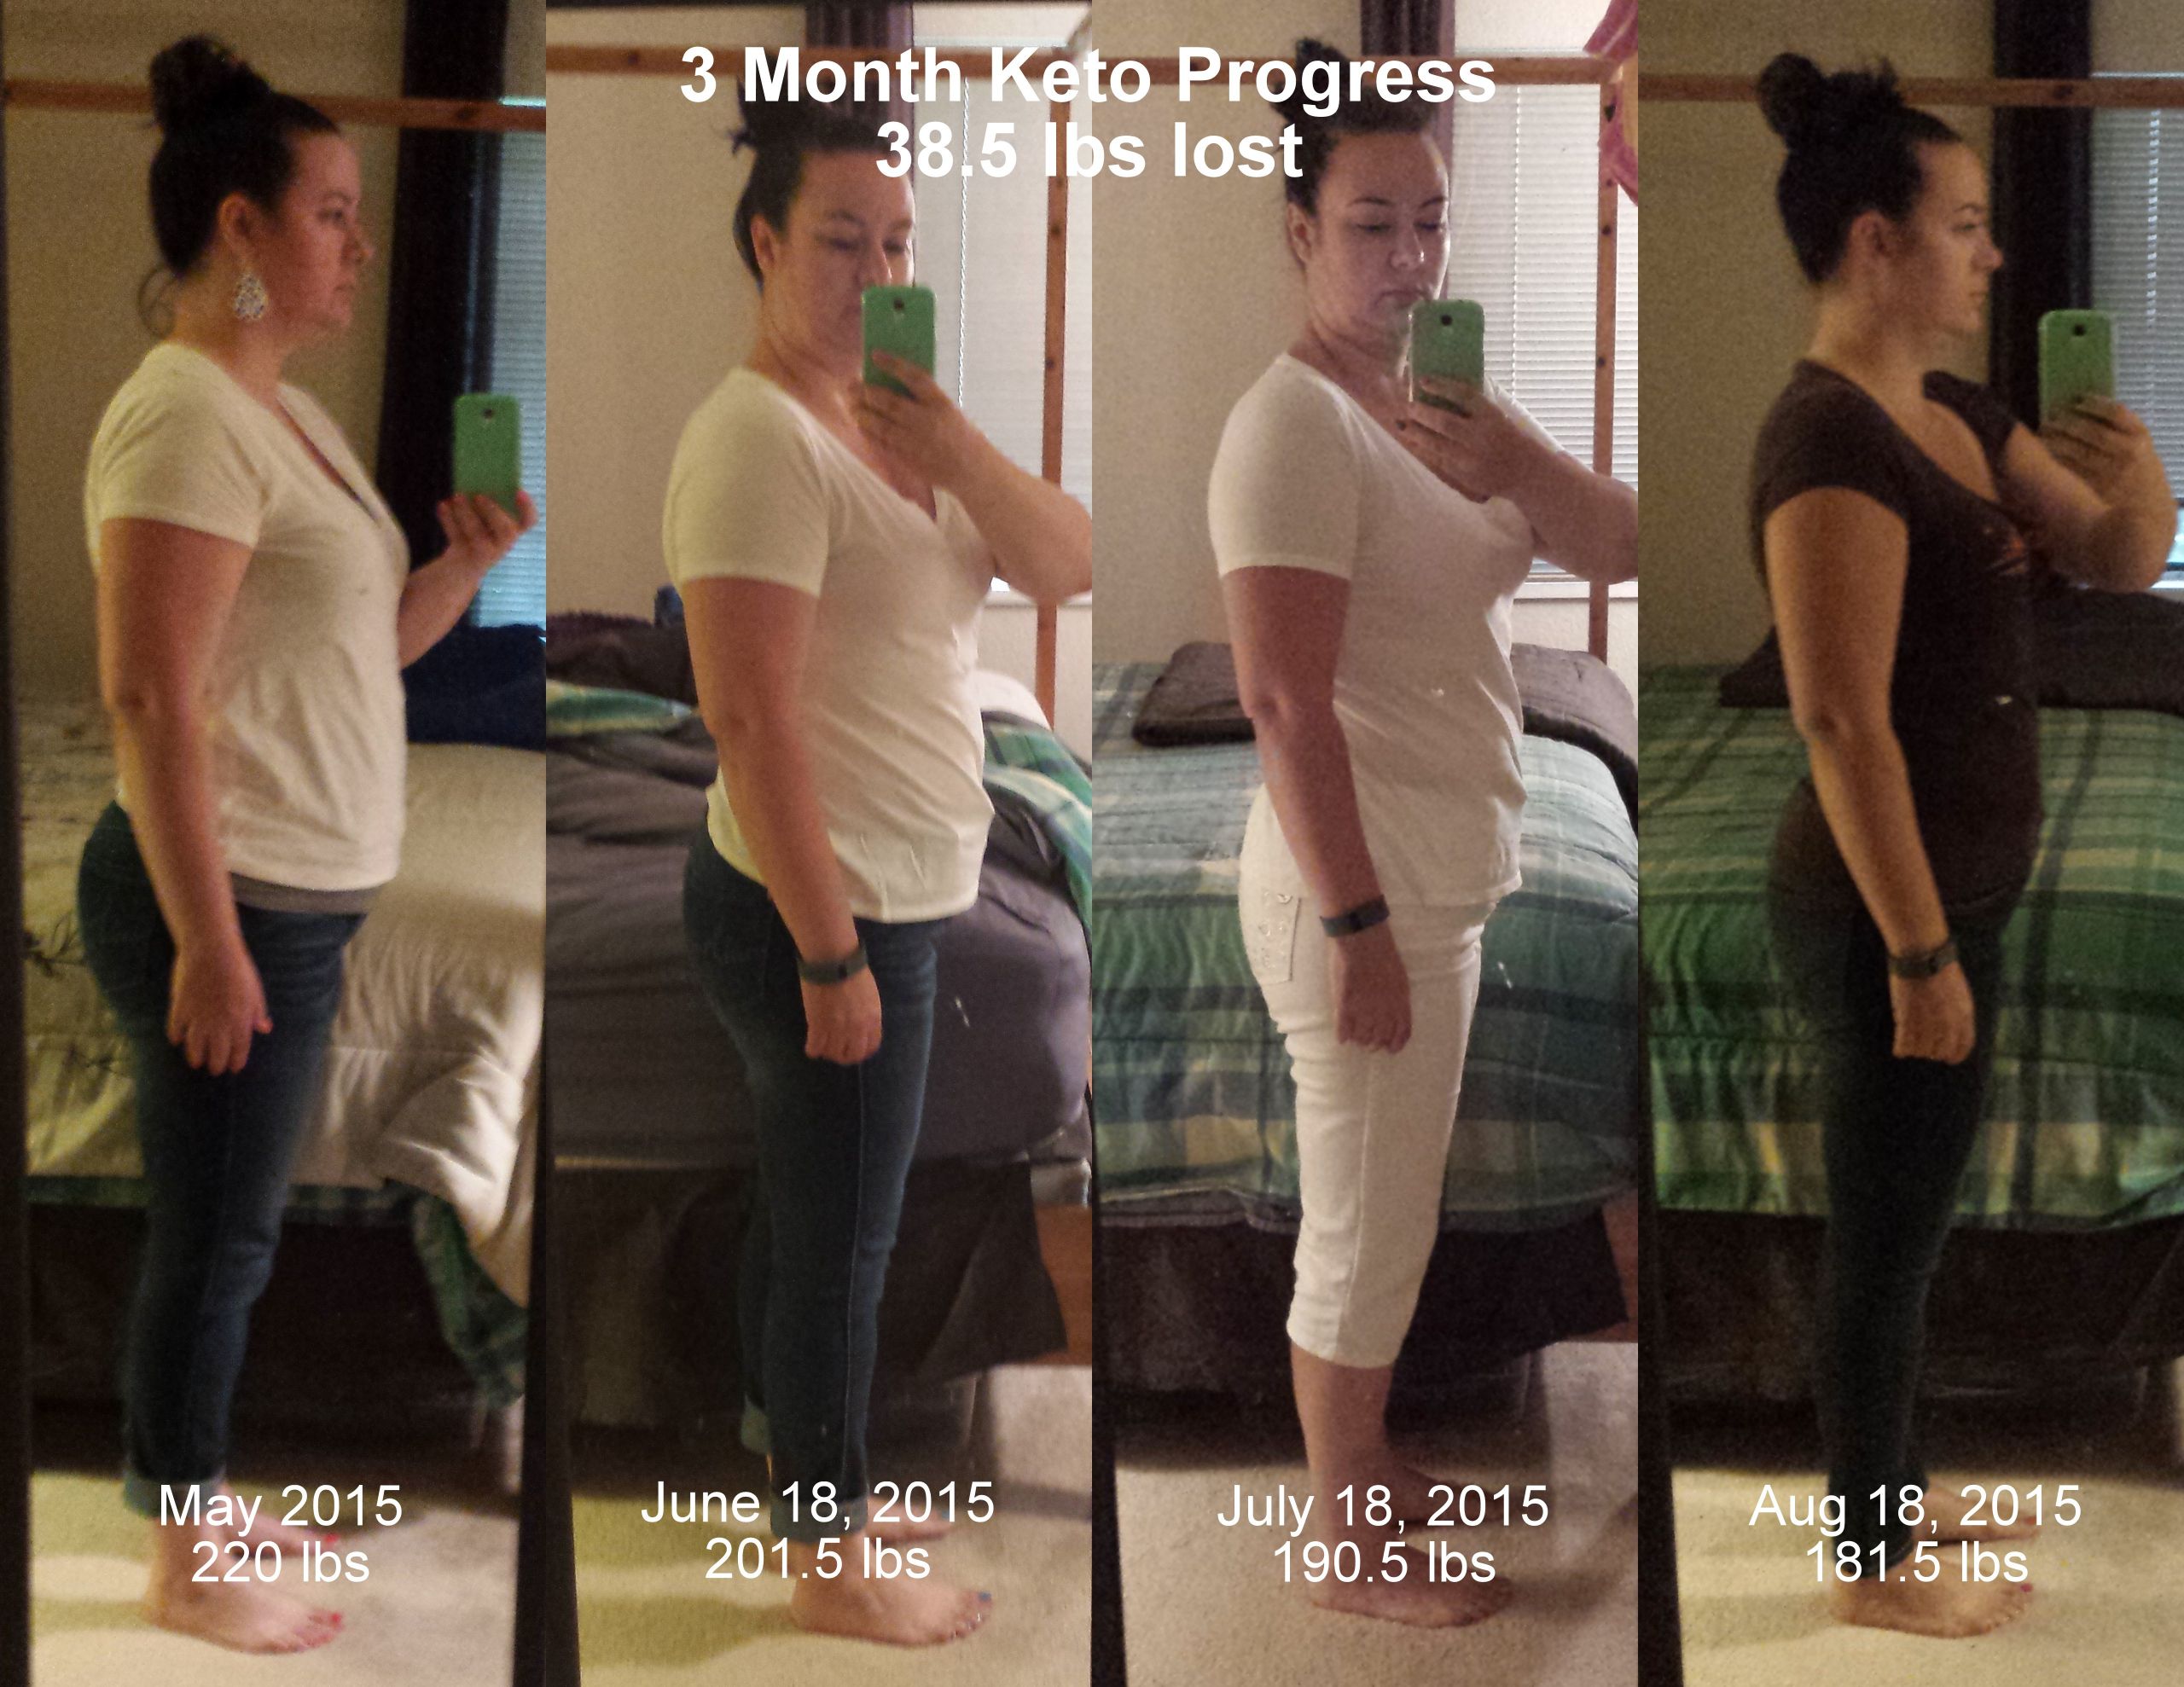 https://hqproductreviews.com/wp-content/uploads/2020/10/keto-diet-before-and-after-1-month-new-3-month-update-on-my-ketogenic-diet-experiment-of-keto-diet-before-and-after-1-month-scaled.jpg